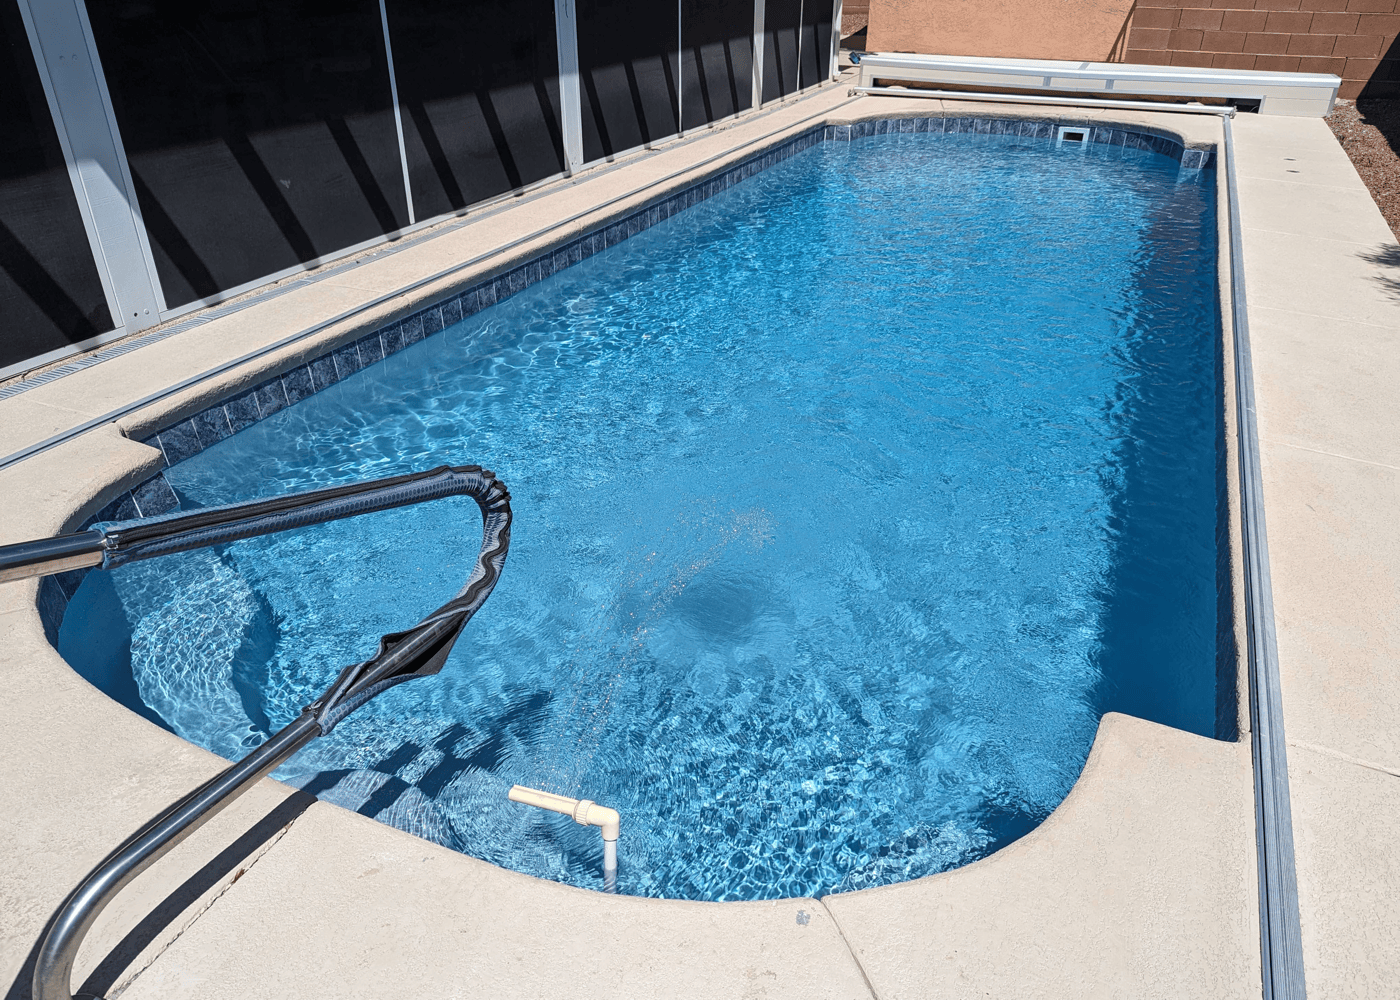 An in-ground pool filled with clear, sparkling water.